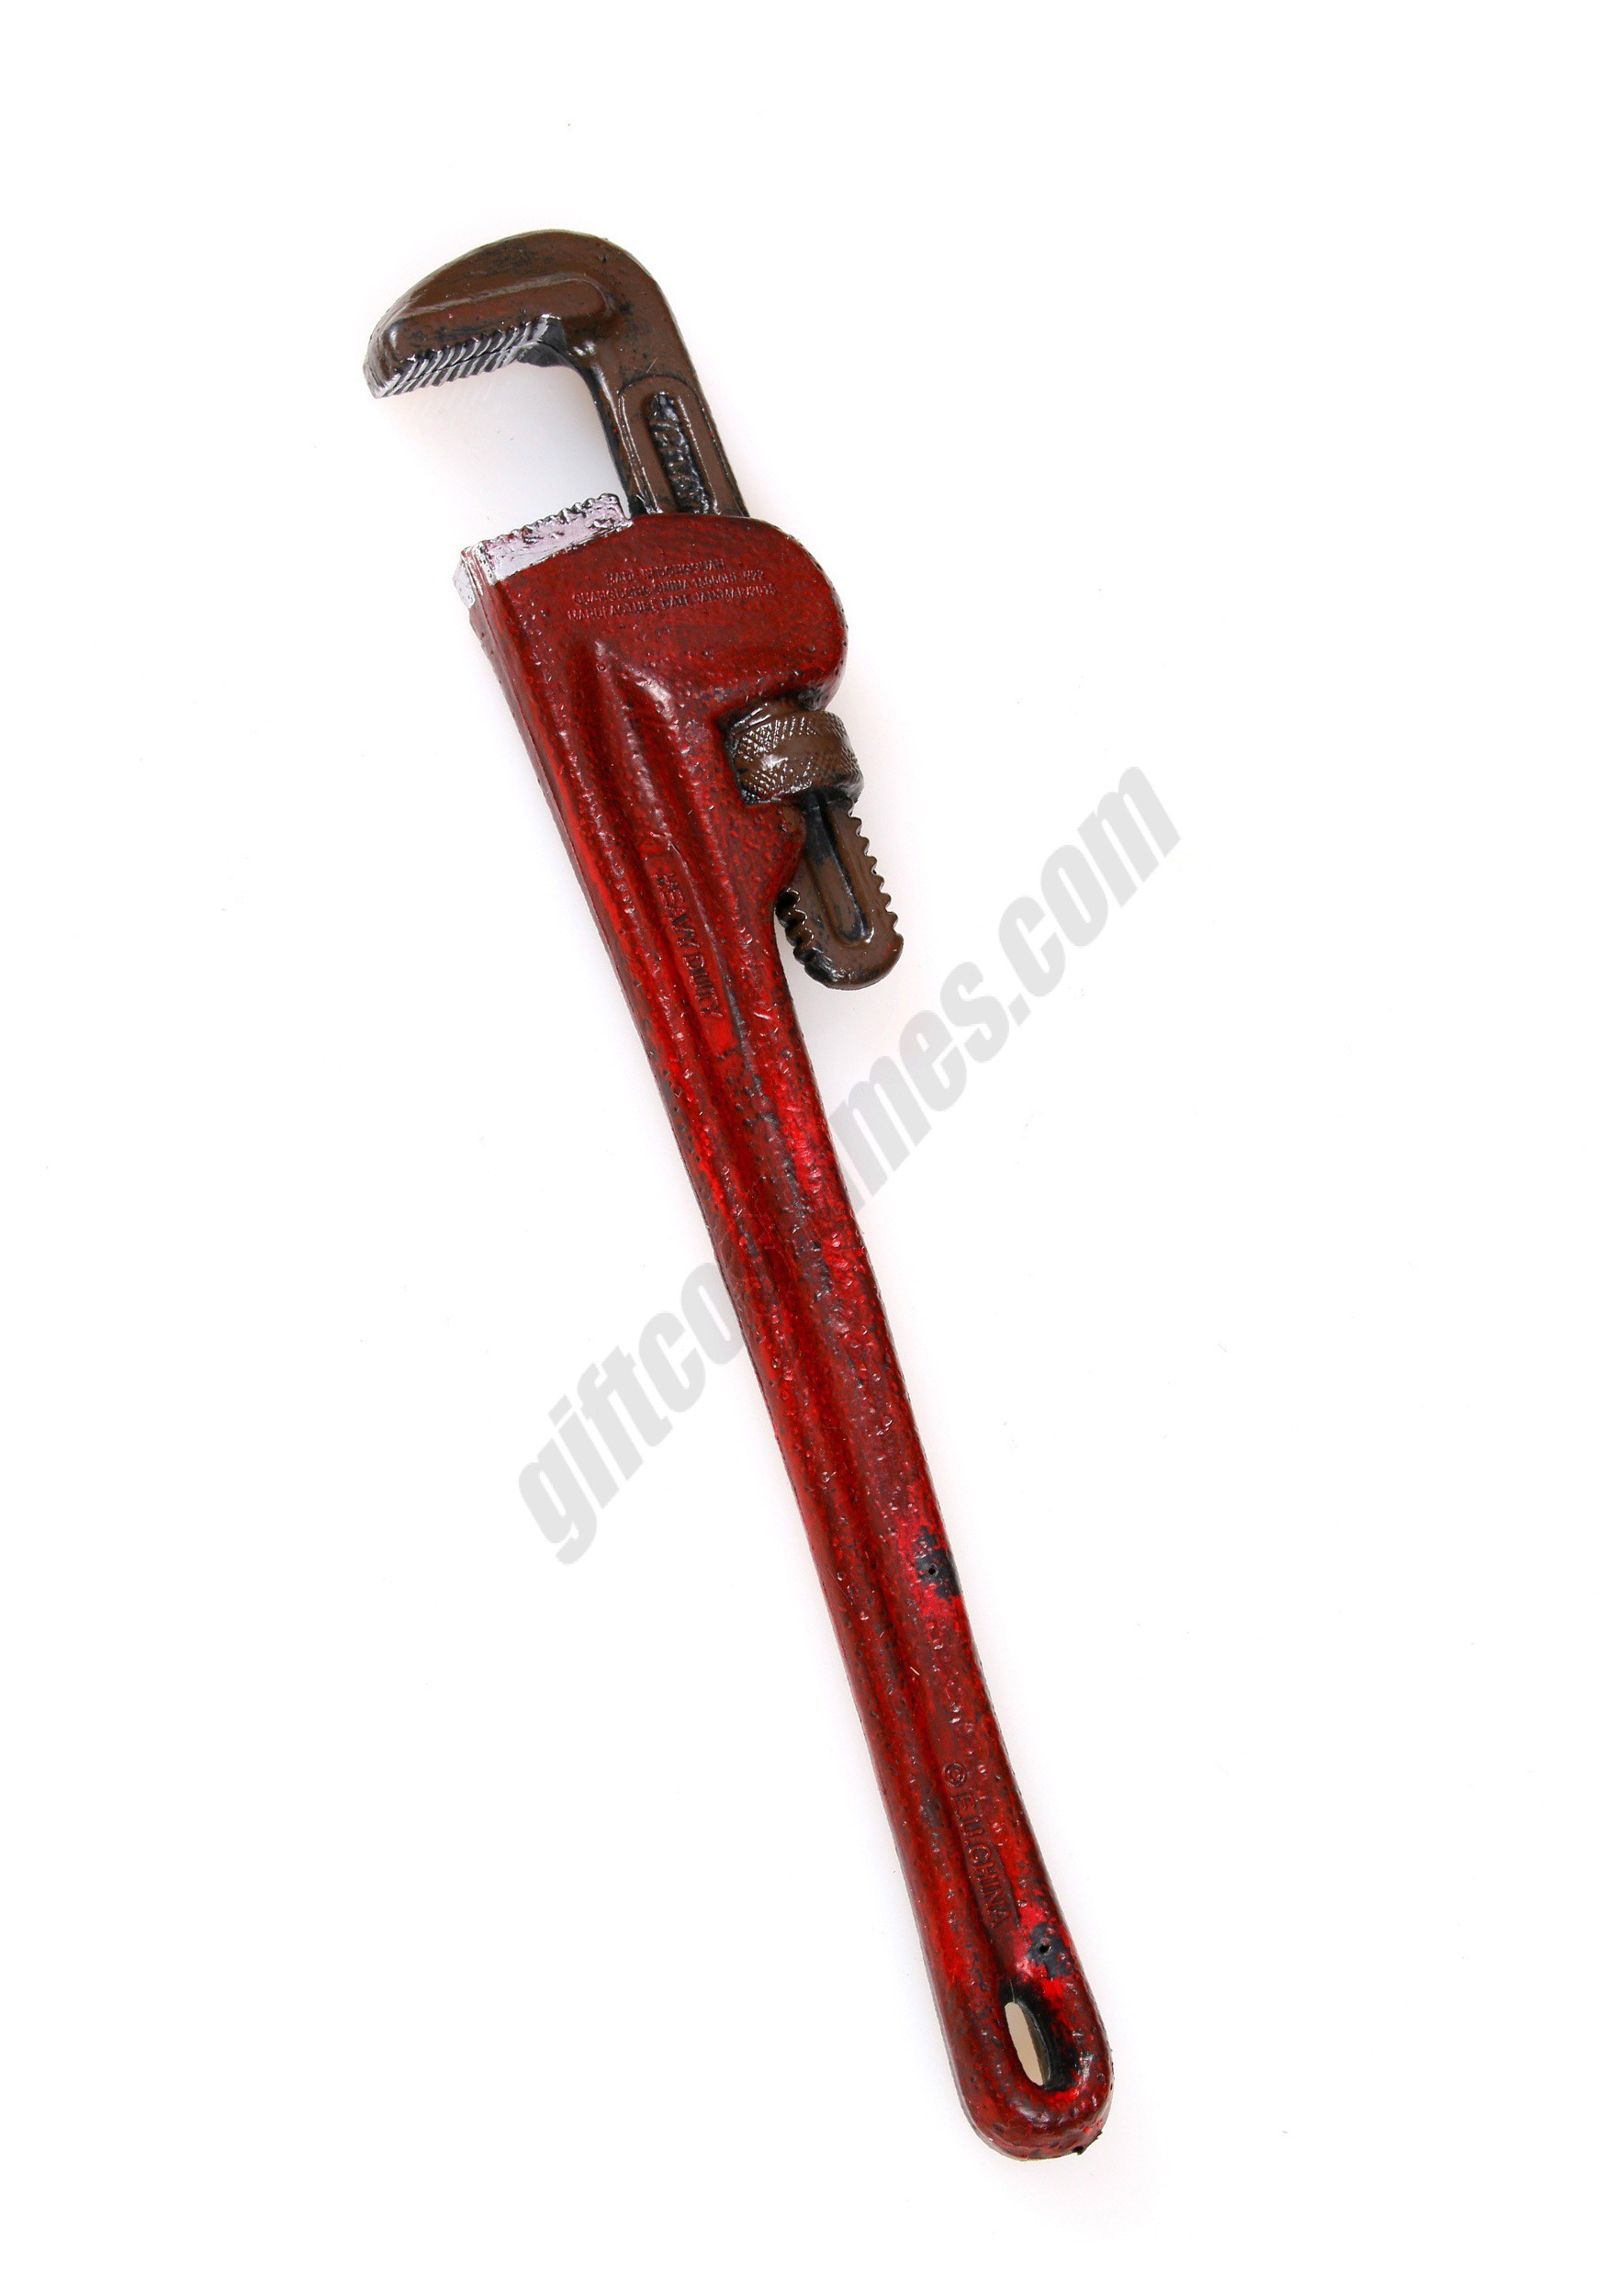 Prop Pipe Wrench Promotions - Prop Pipe Wrench Promotions